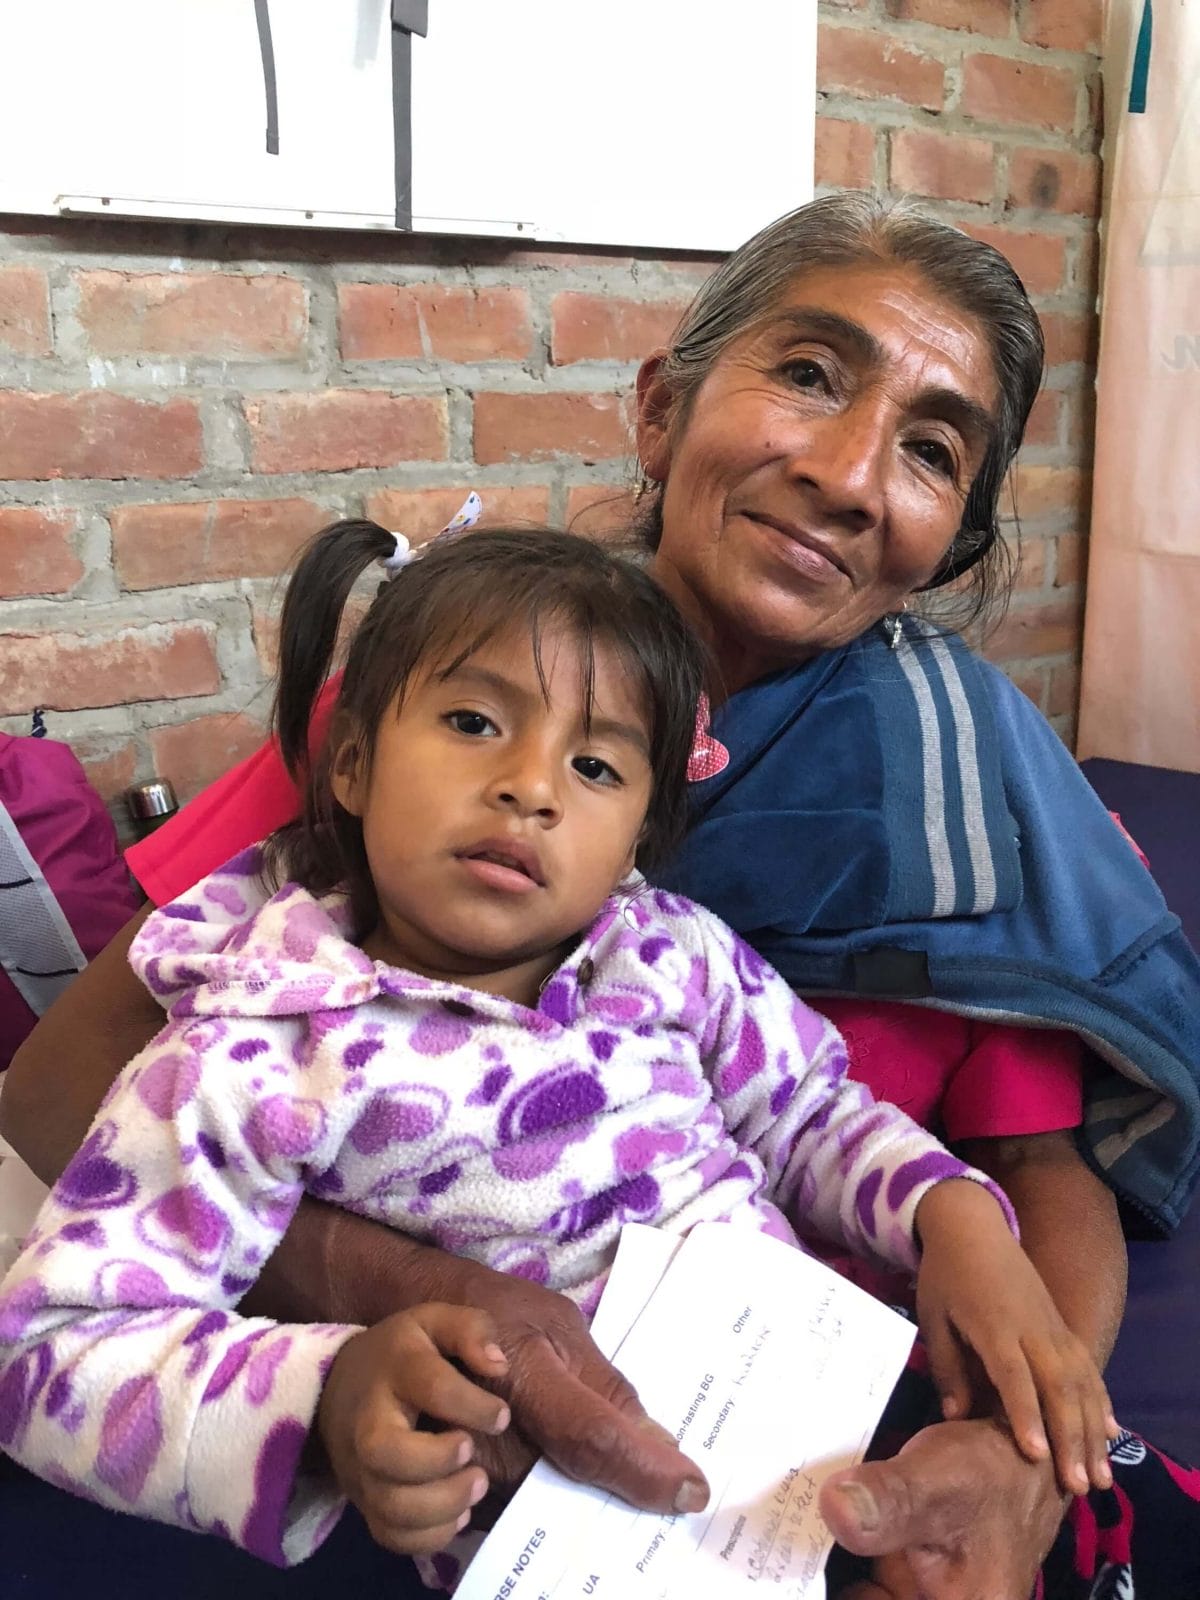 Woman, girl patients at clinic in Ecuador